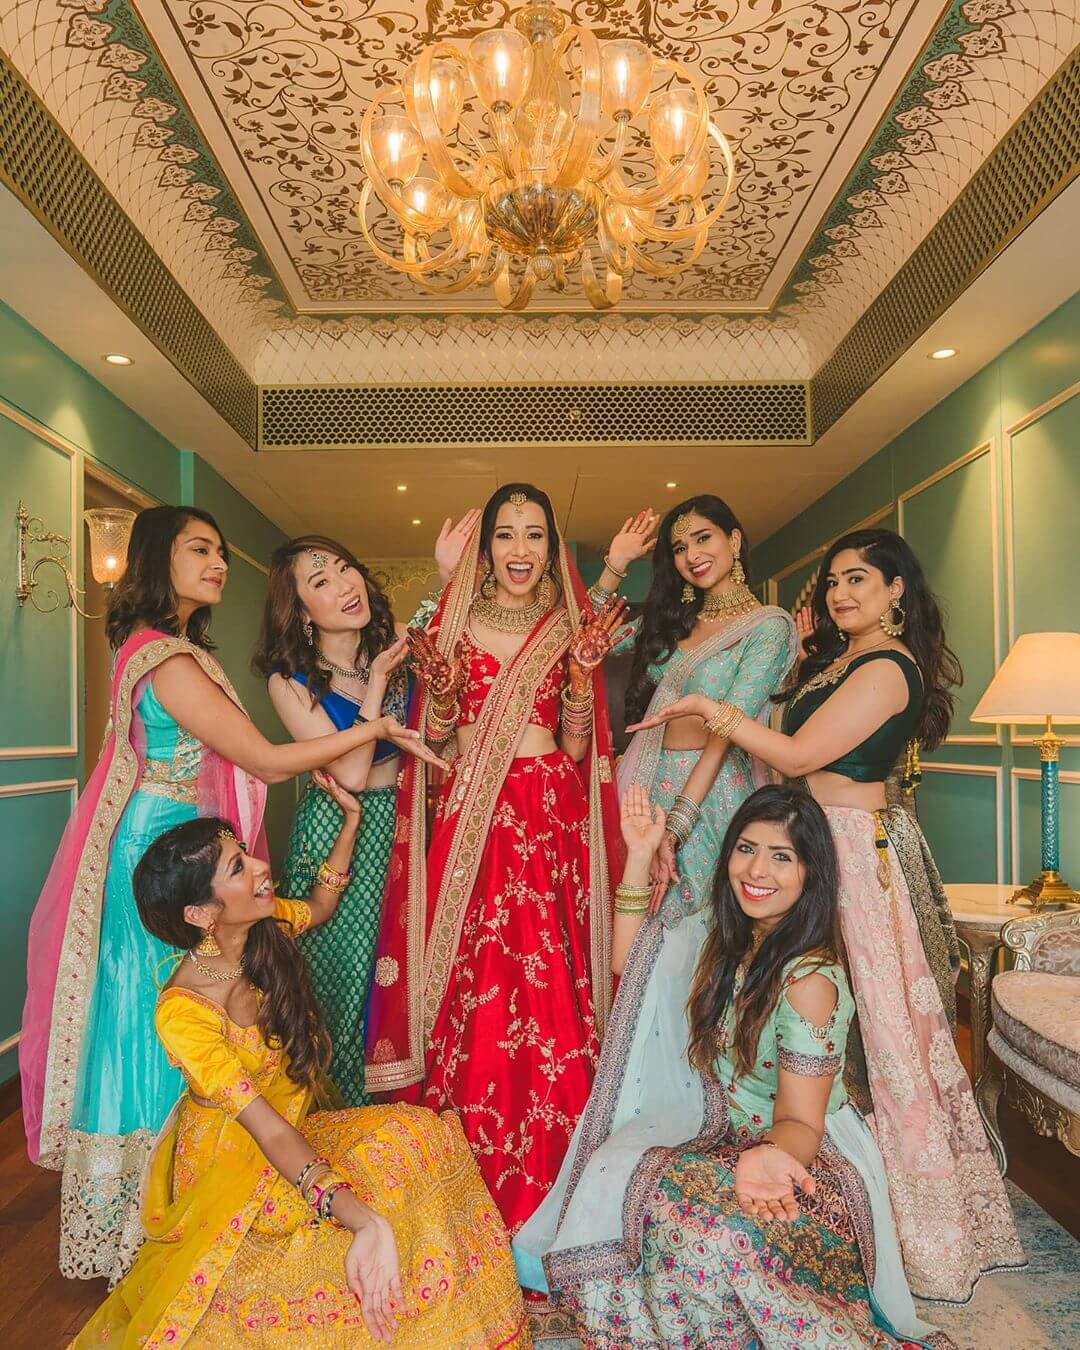 Photoshoot Poses Bride With Multiple Hand Cover